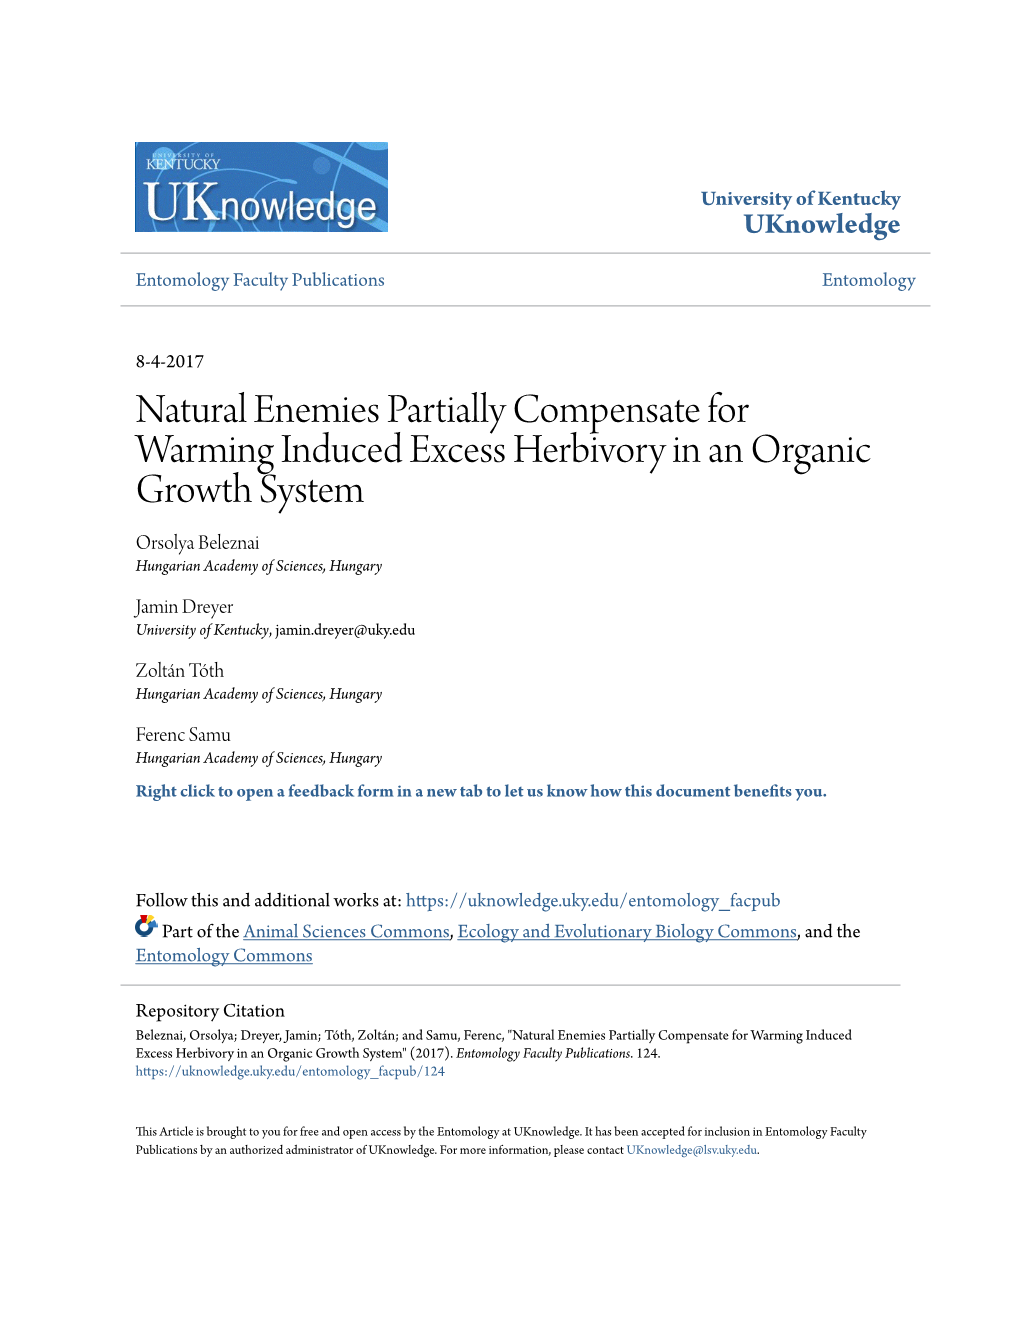 Natural Enemies Partially Compensate for Warming Induced Excess Herbivory in an Organic Growth System Orsolya Beleznai Hungarian Academy of Sciences, Hungary